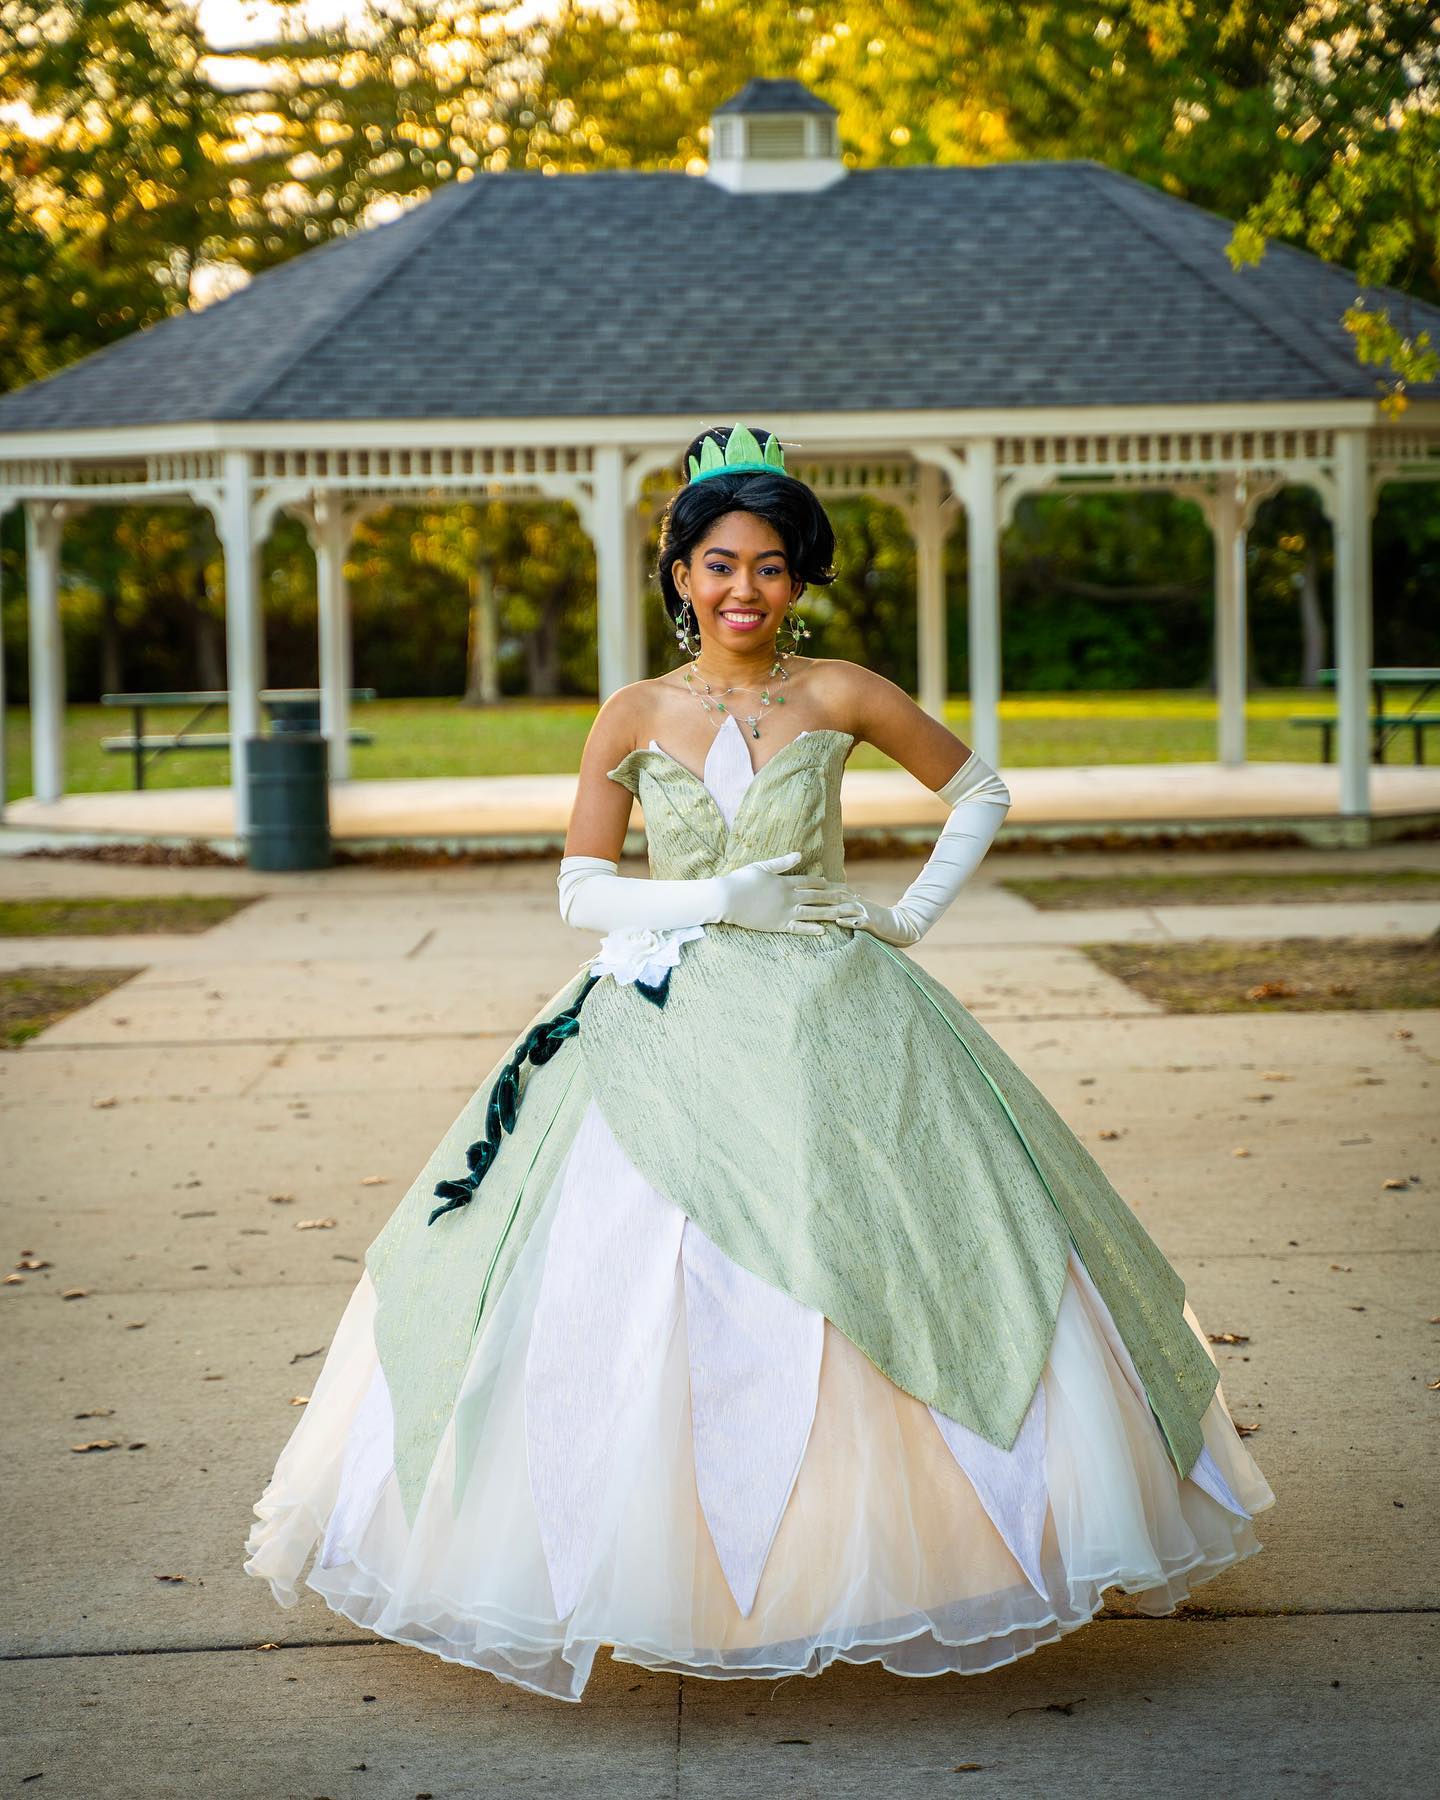 Image of a woman dressed up as Princess Tiana from the Princess and the Frog Movie. Featuring a ball gown with a large hoop skirt and she is wearing a tiara. 